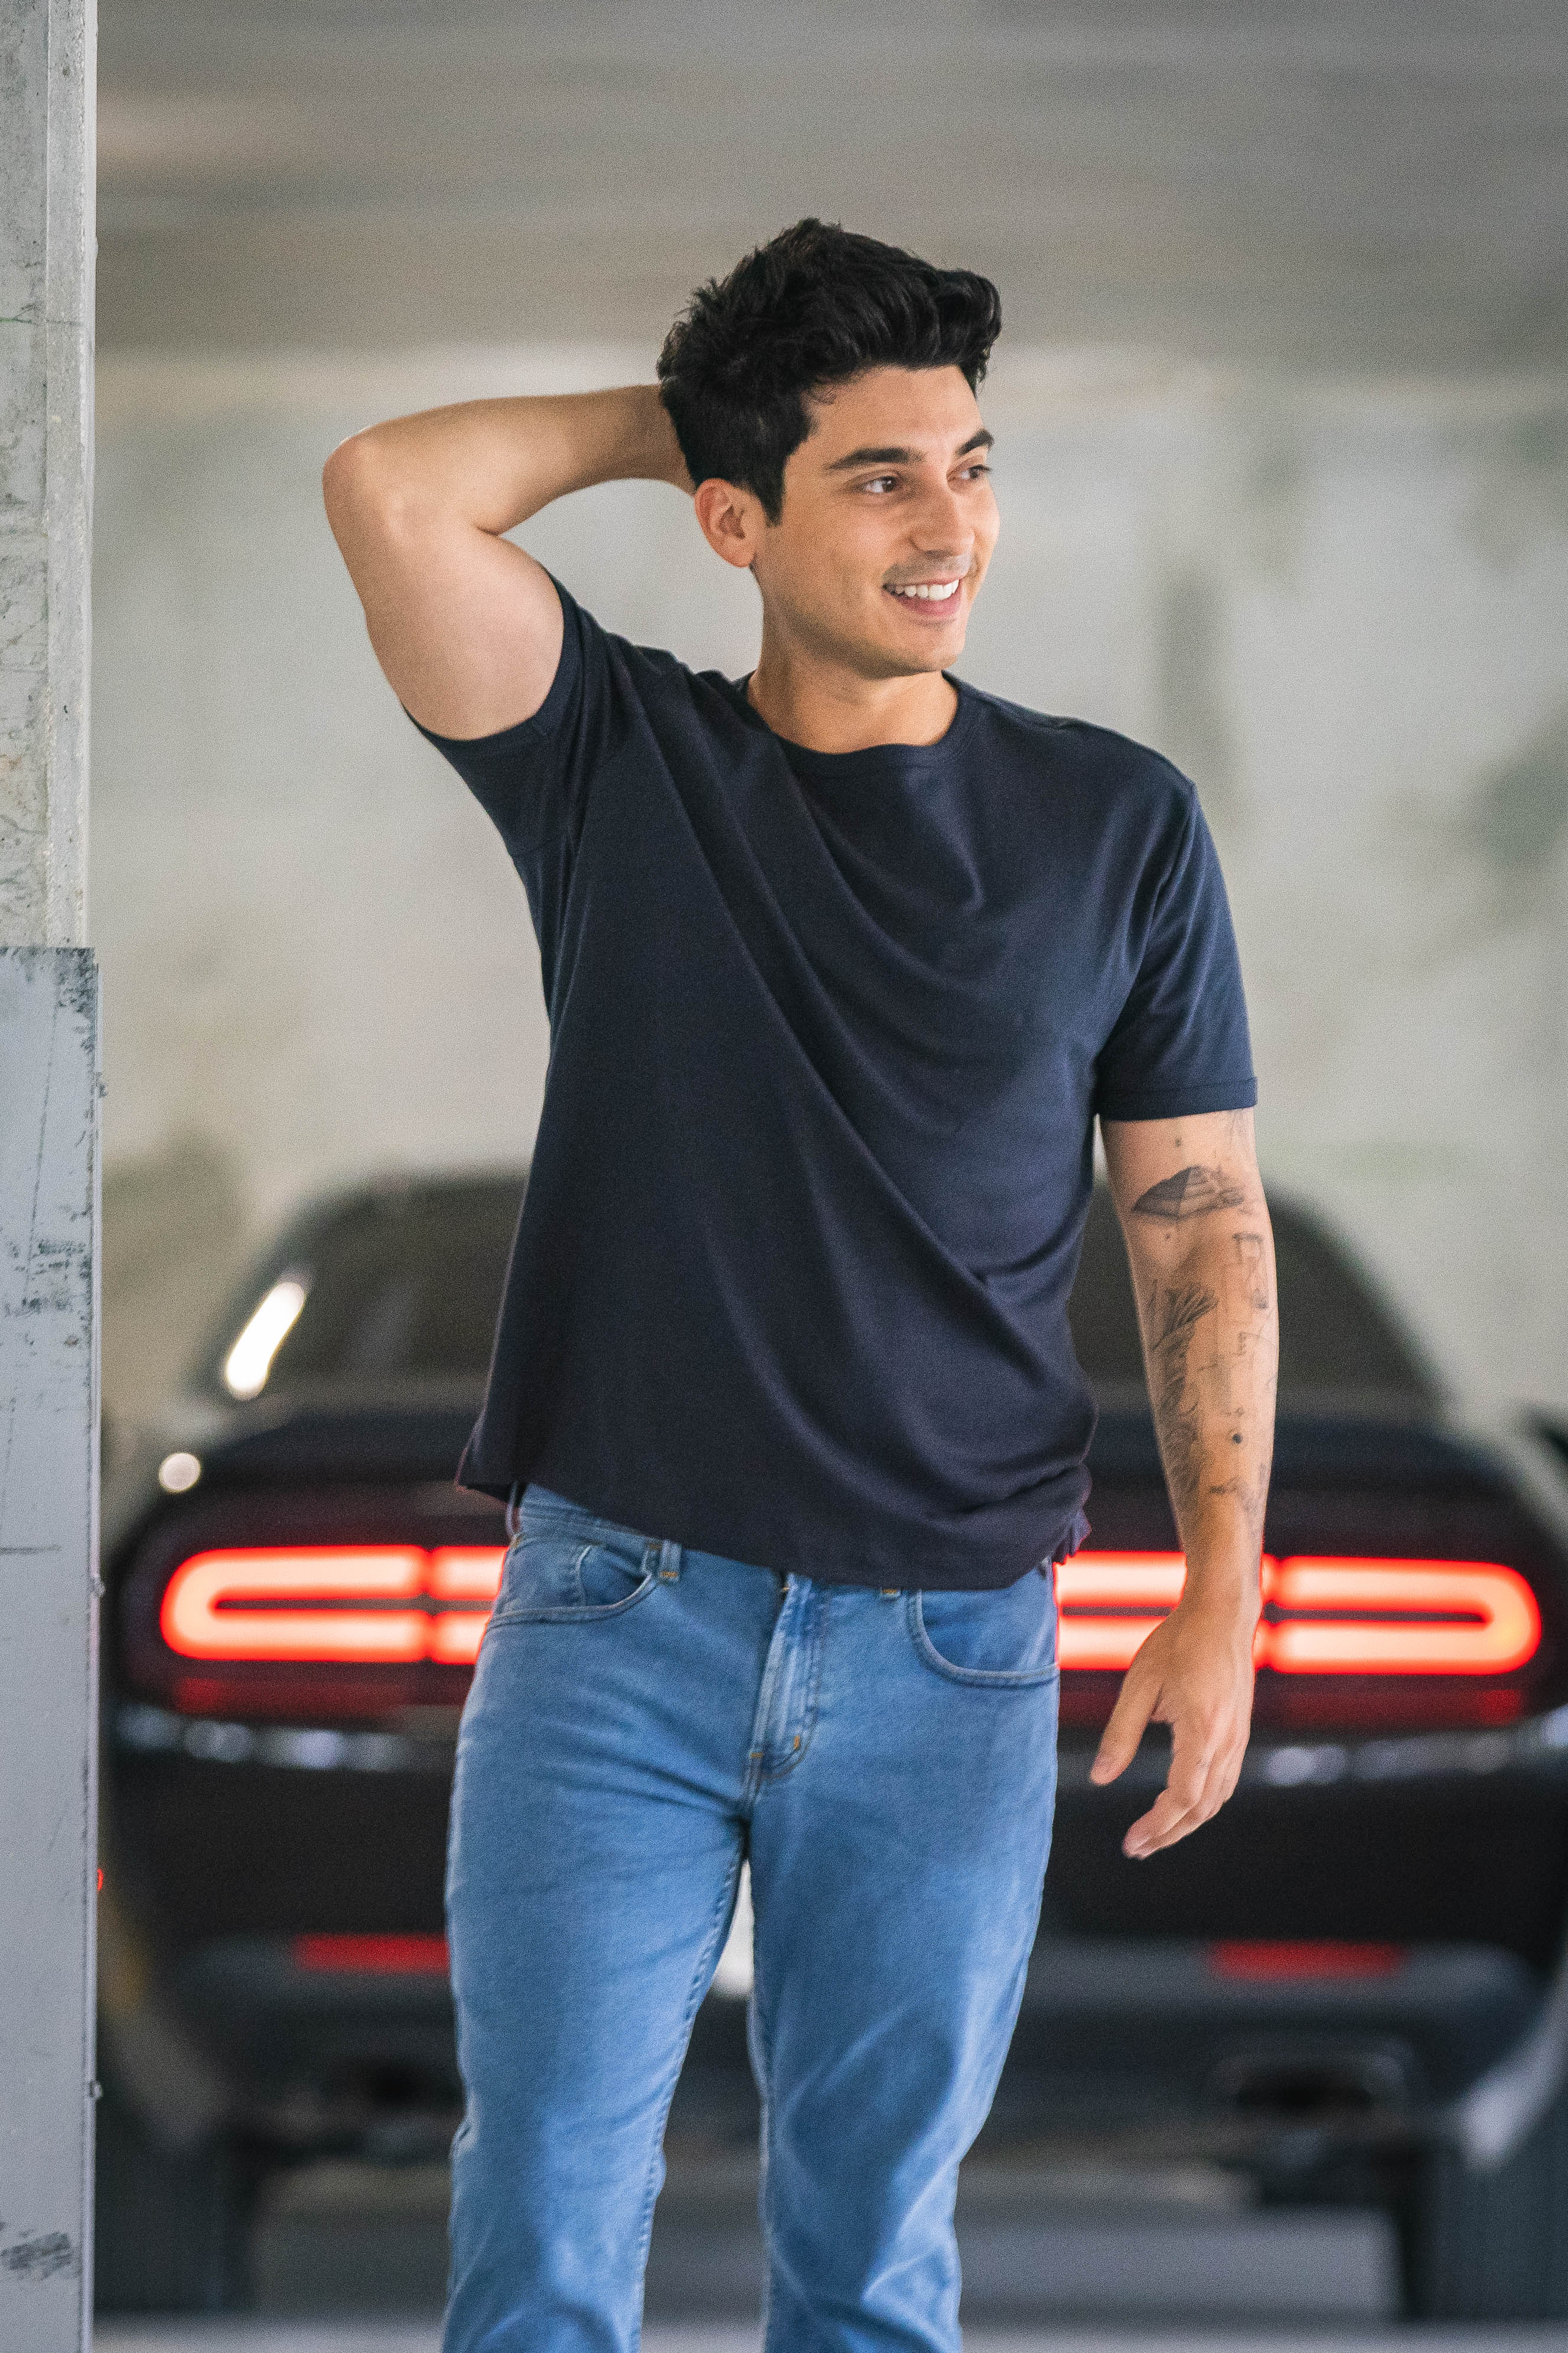 Black T-shirt + old jeans + boots